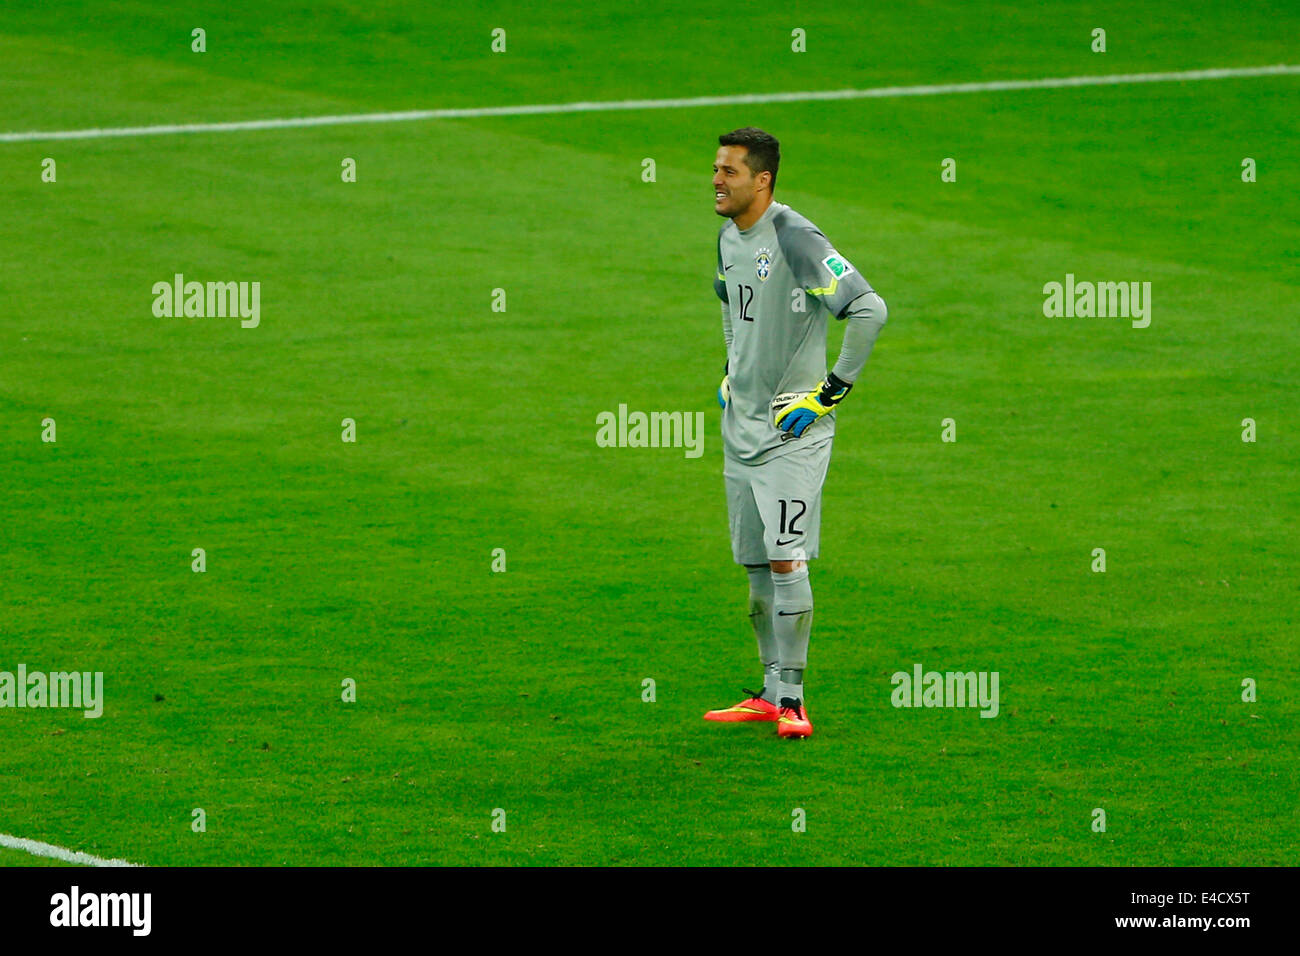 Belo Horizonte, Brazil. 8th July, 2014. Brazil's goalkeeper Julio Cesar reacts after a semifinal match between Brazil and Germany of 2014 FIFA World Cup at the Estadio Mineirao Stadium in Belo Horizonte, Brazil, on July 8, 2014. Germany won 7-1 over Brazil and qualified for the final on Tuesday. Credit:  Liu Bin/Xinhua/Alamy Live News Stock Photo